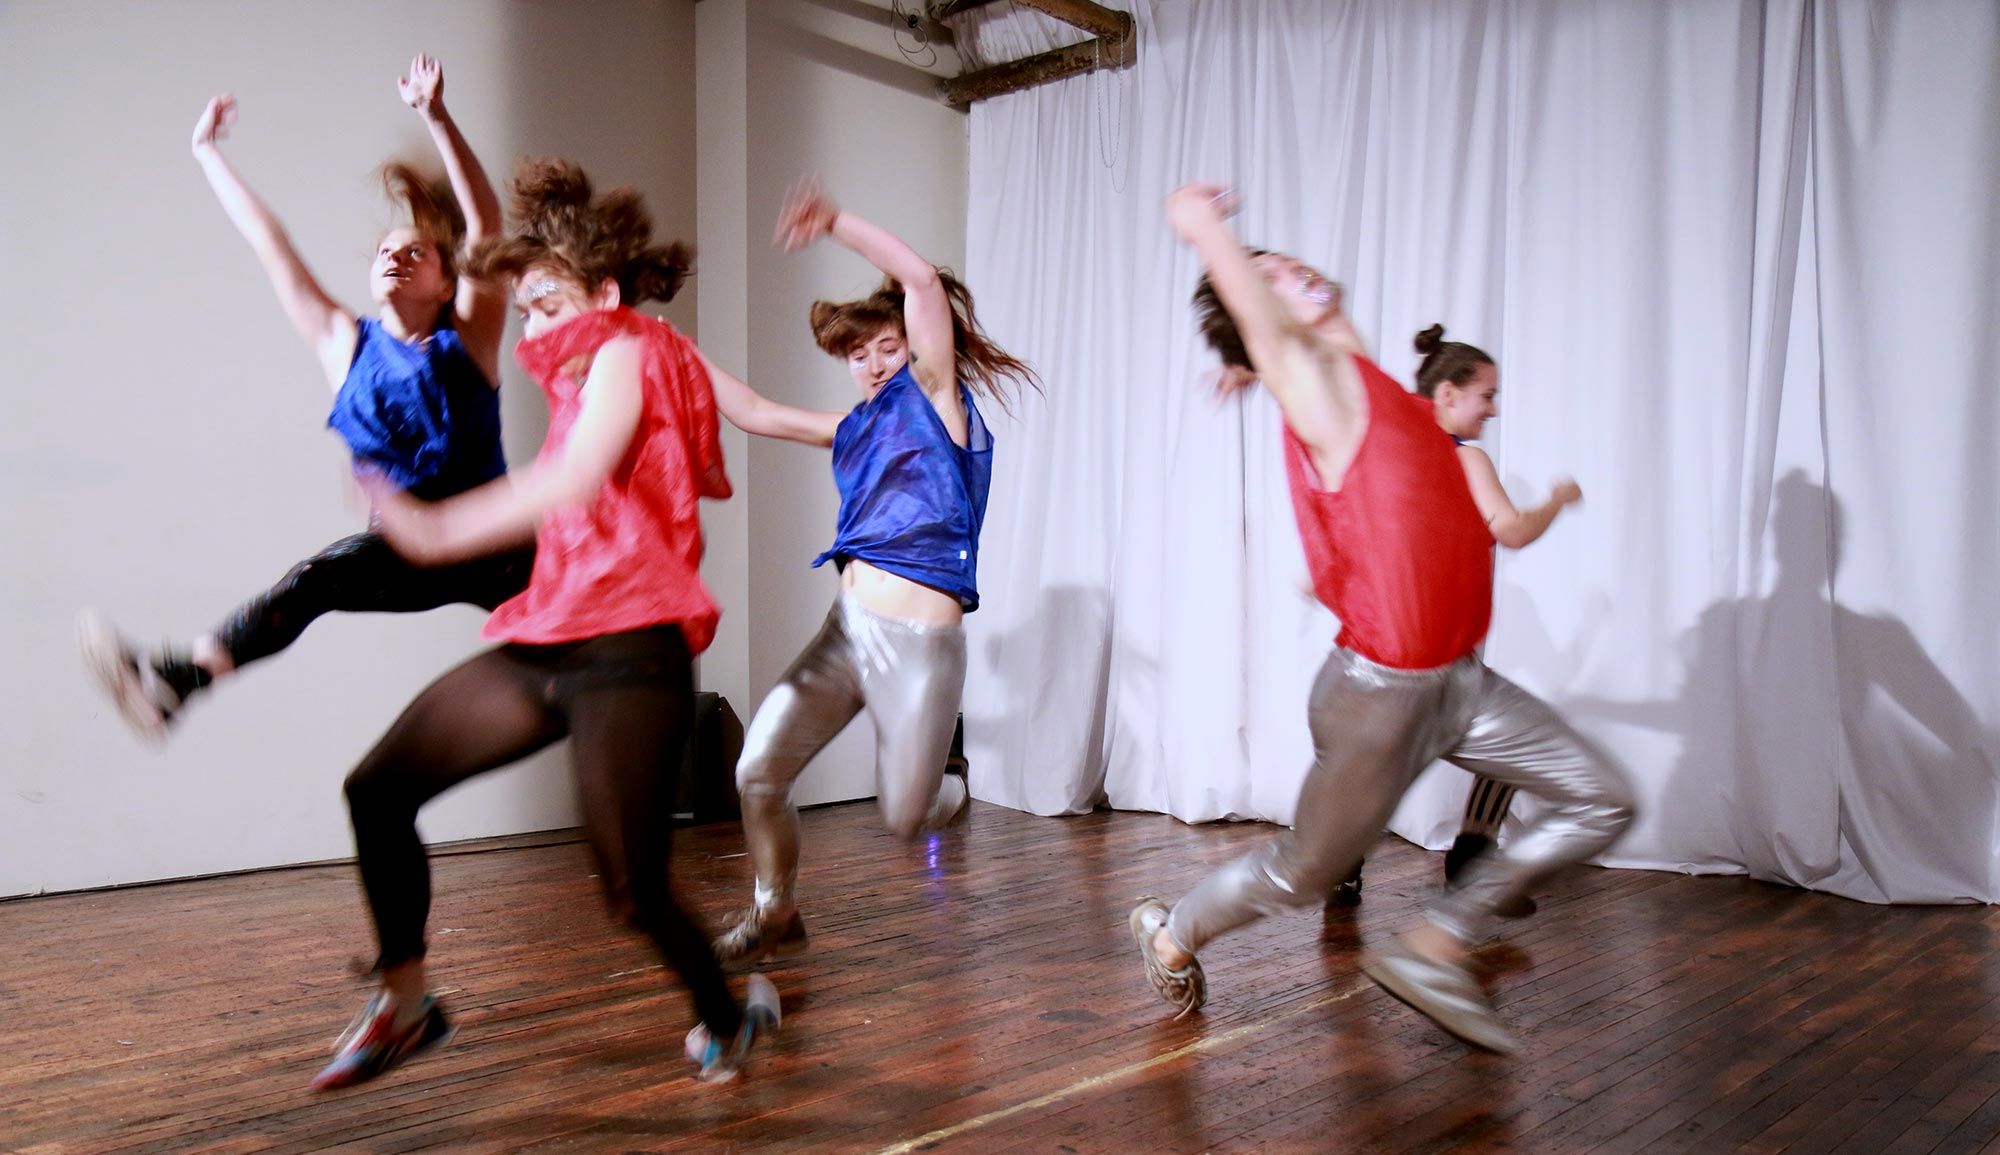 Five young dancers wearing blue and red pennies and vibrant tights are falling to the floor